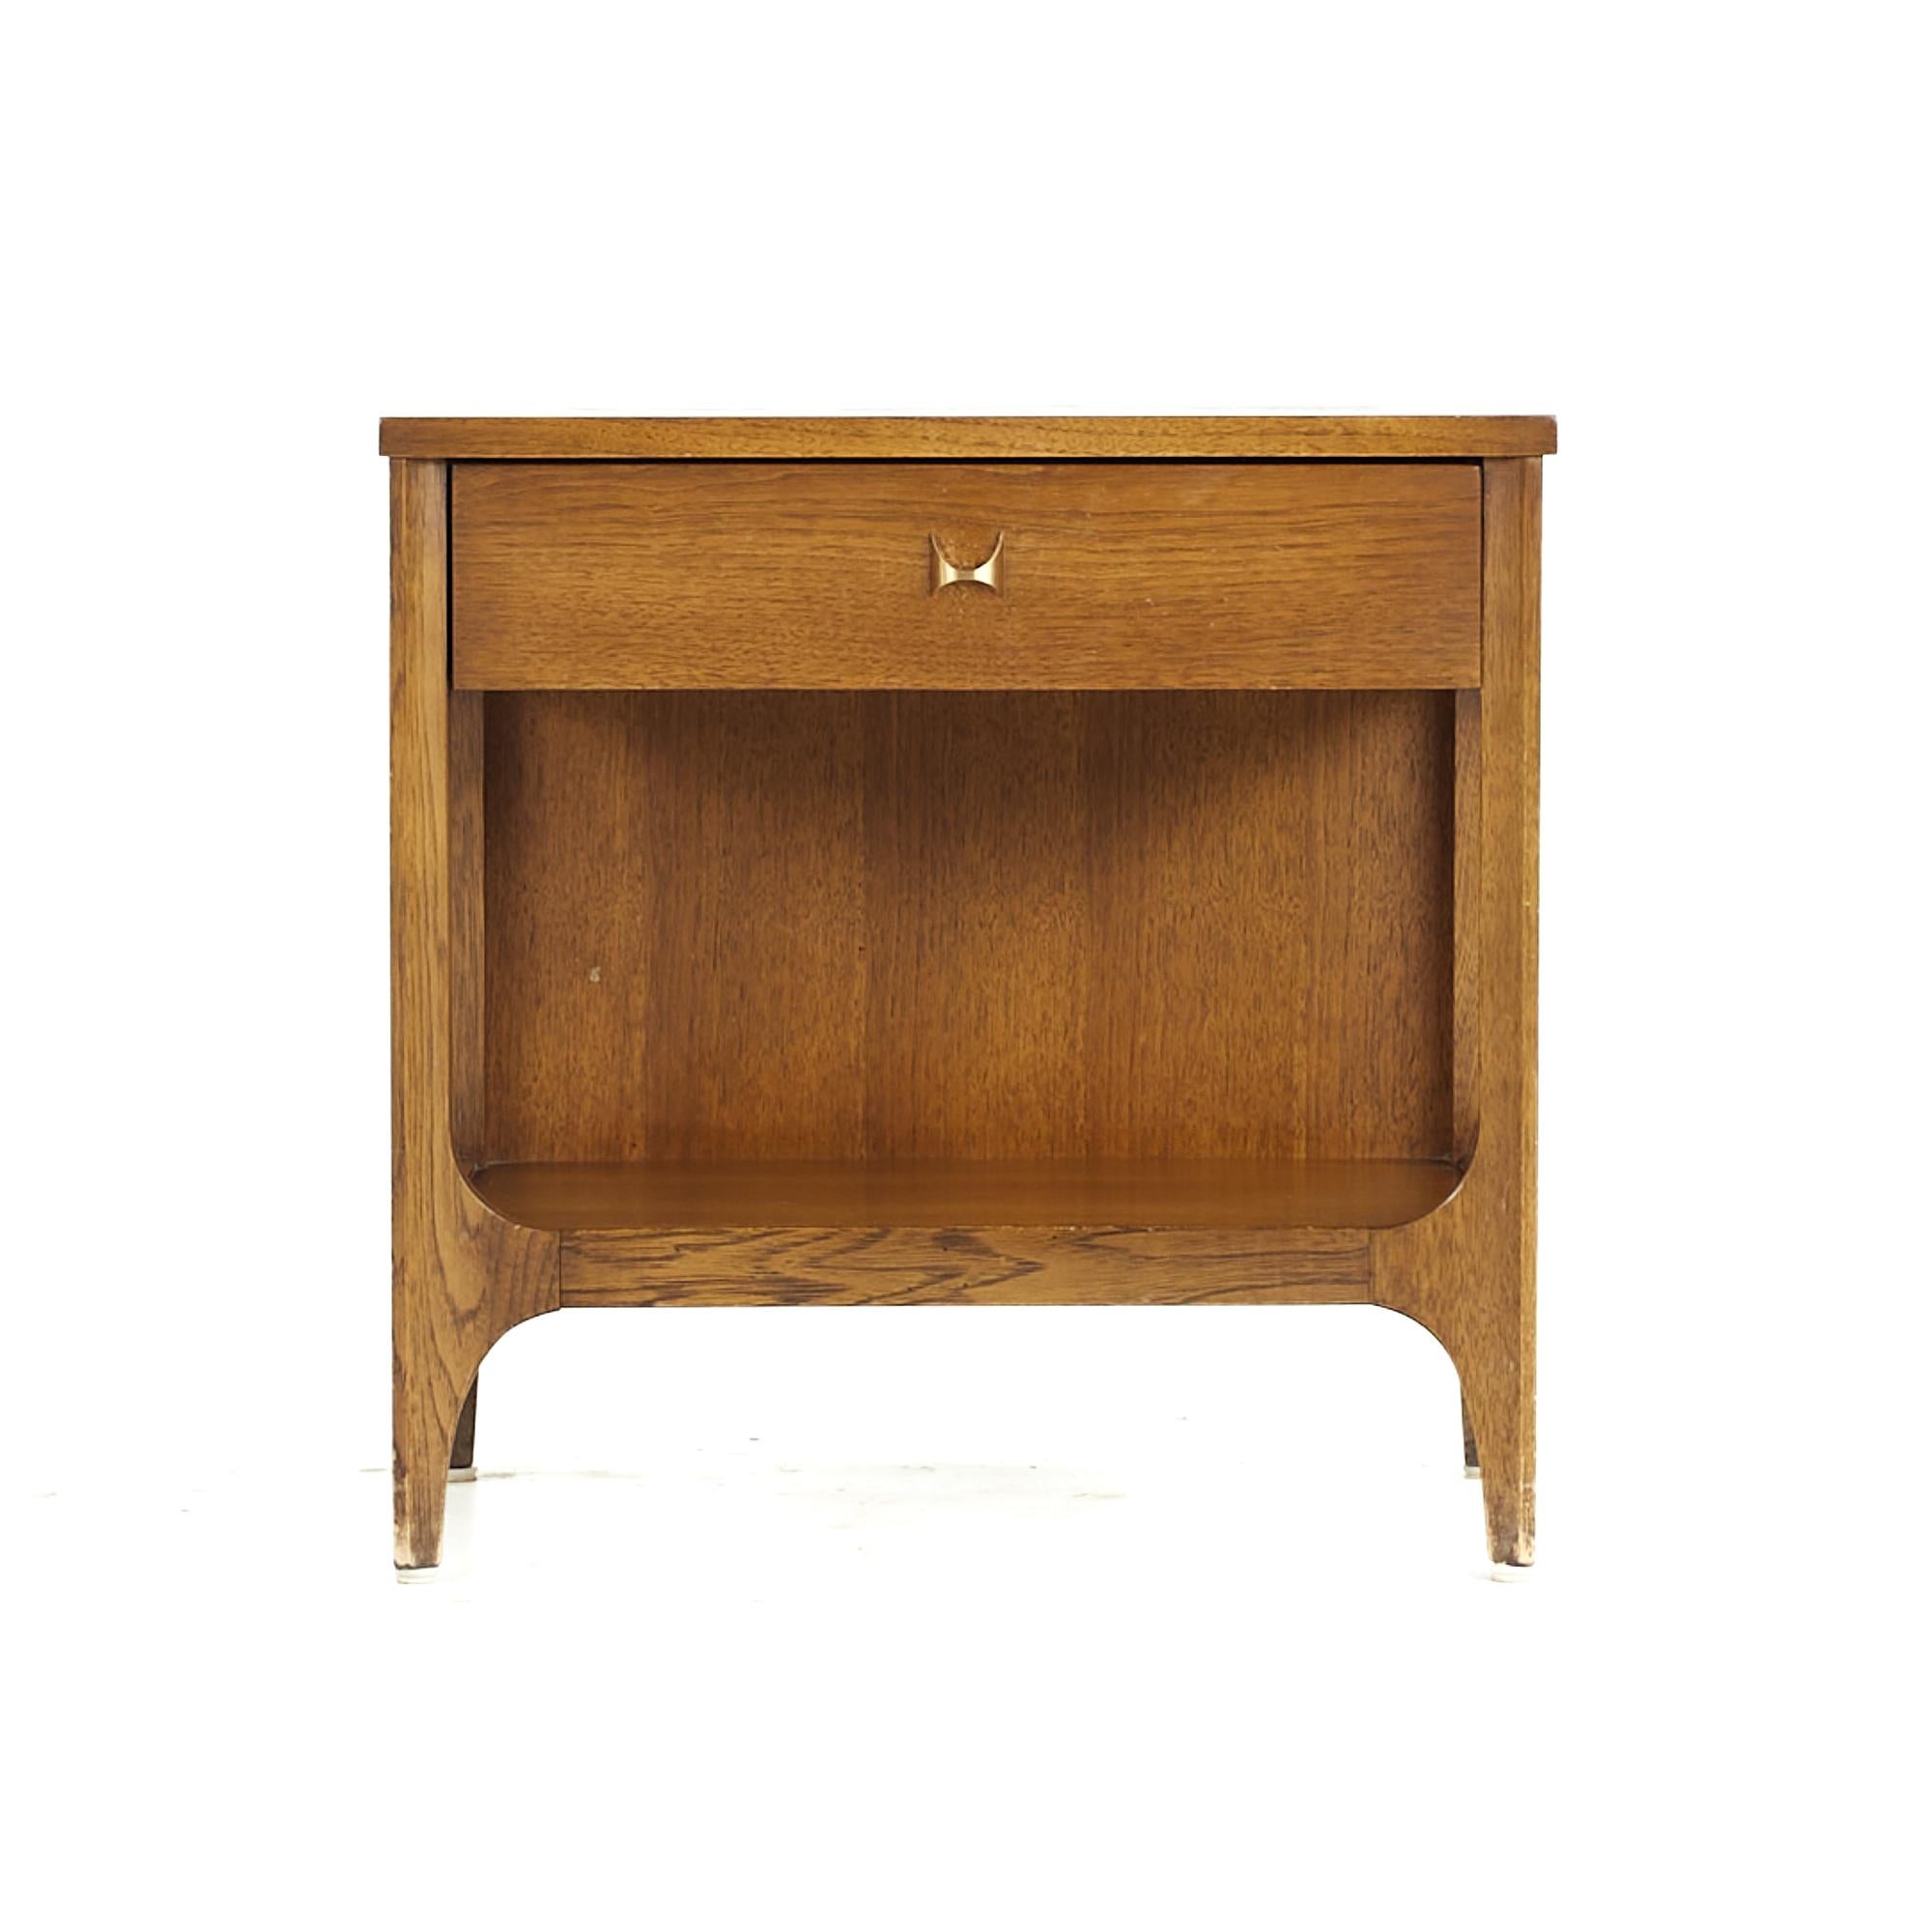 Broyhill Brasilia Mid Century Walnut and Brass Nightstand

This nightstand measures: 22.25 wide x 15 deep x 22.25 inches high

All pieces of furniture can be had in what we call restored vintage condition. That means the piece is restored upon